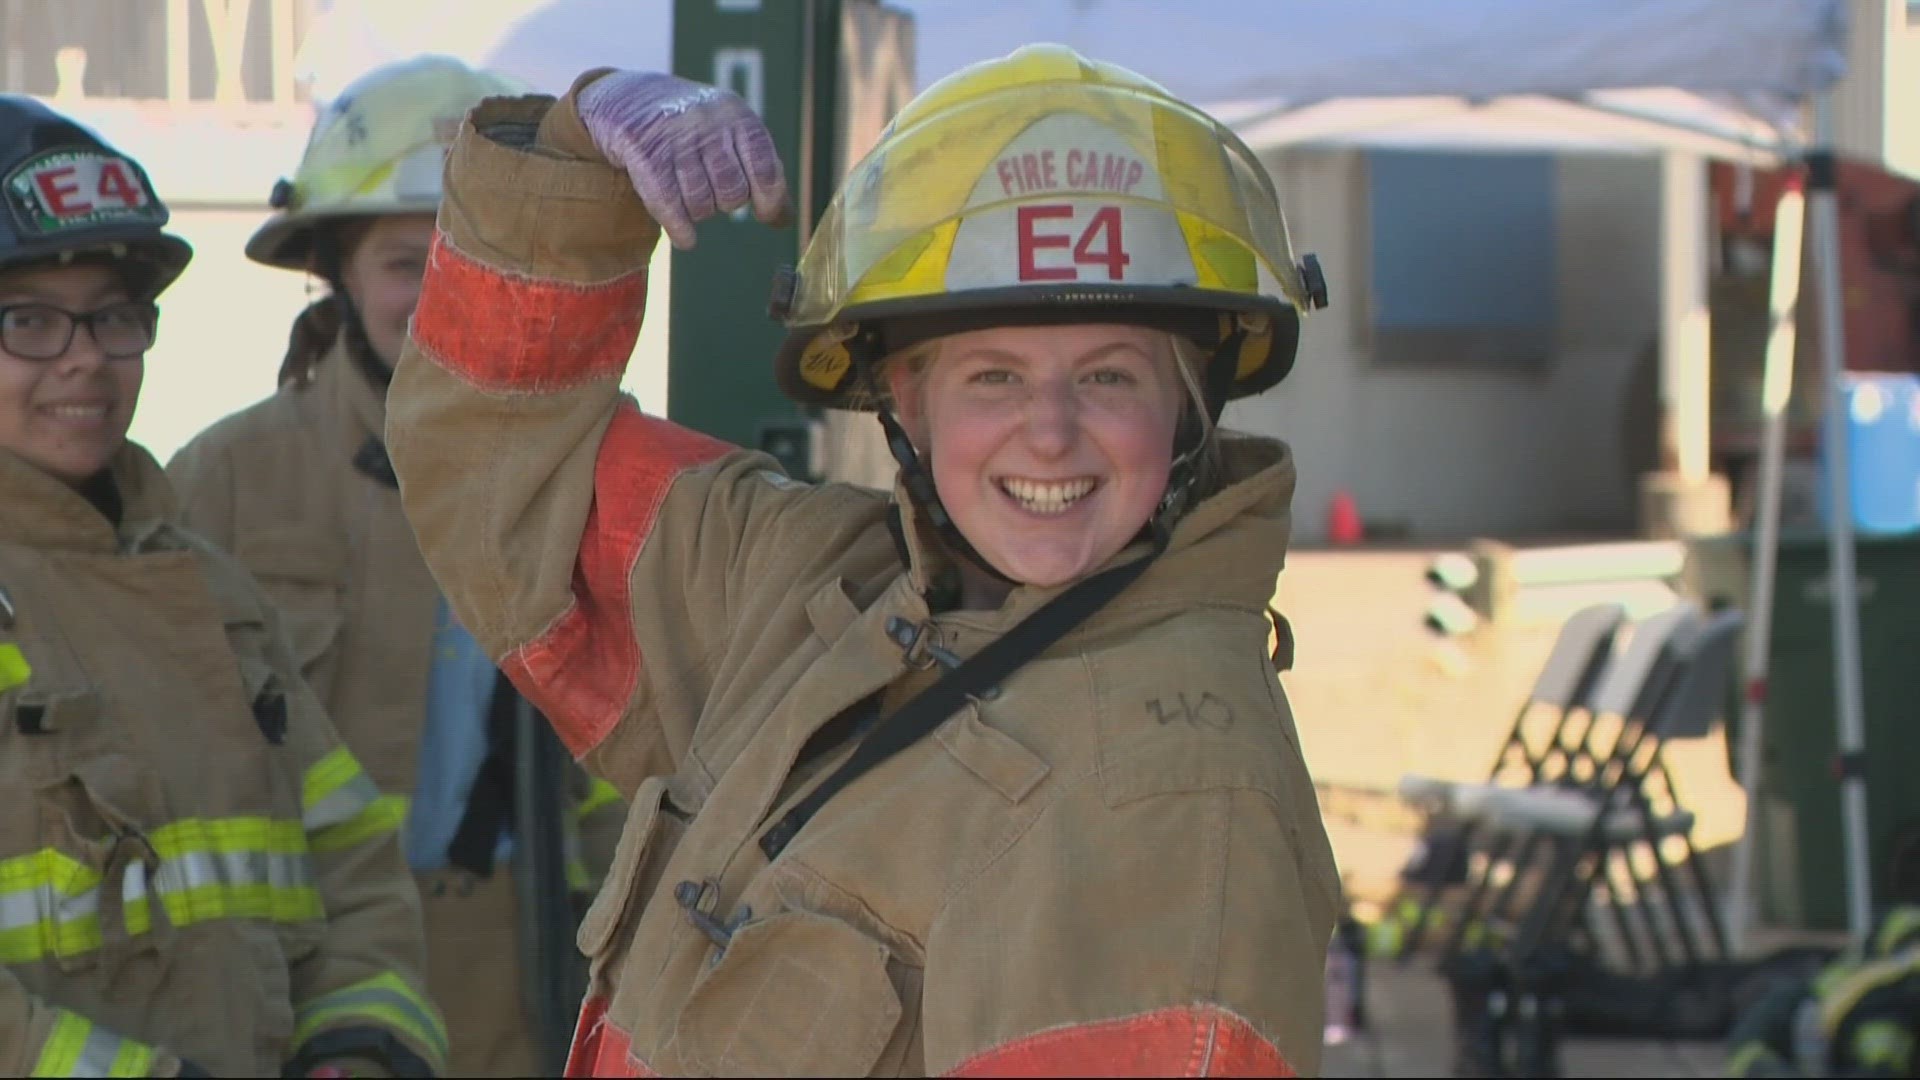 It's a fire camp for females and it's become a tradition, to show teens and young women the ropes of what professional firefighters do.